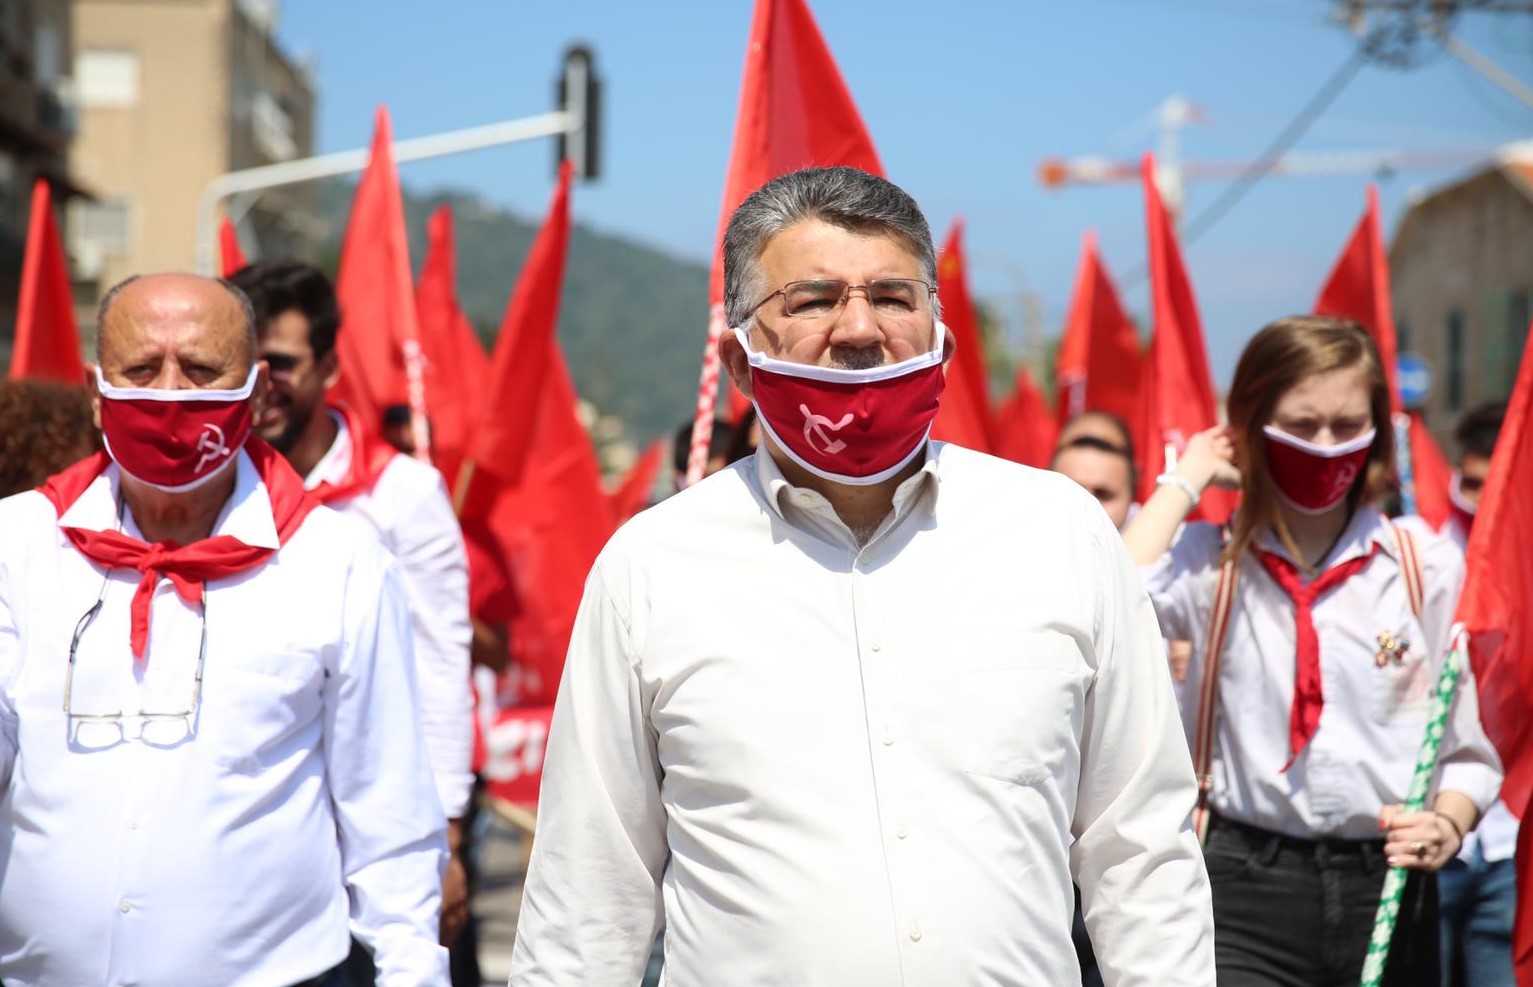 MK Youssef Jabareen (Hadash – Joint List) during the May Day rally held on Friday, May 1, in Haifa